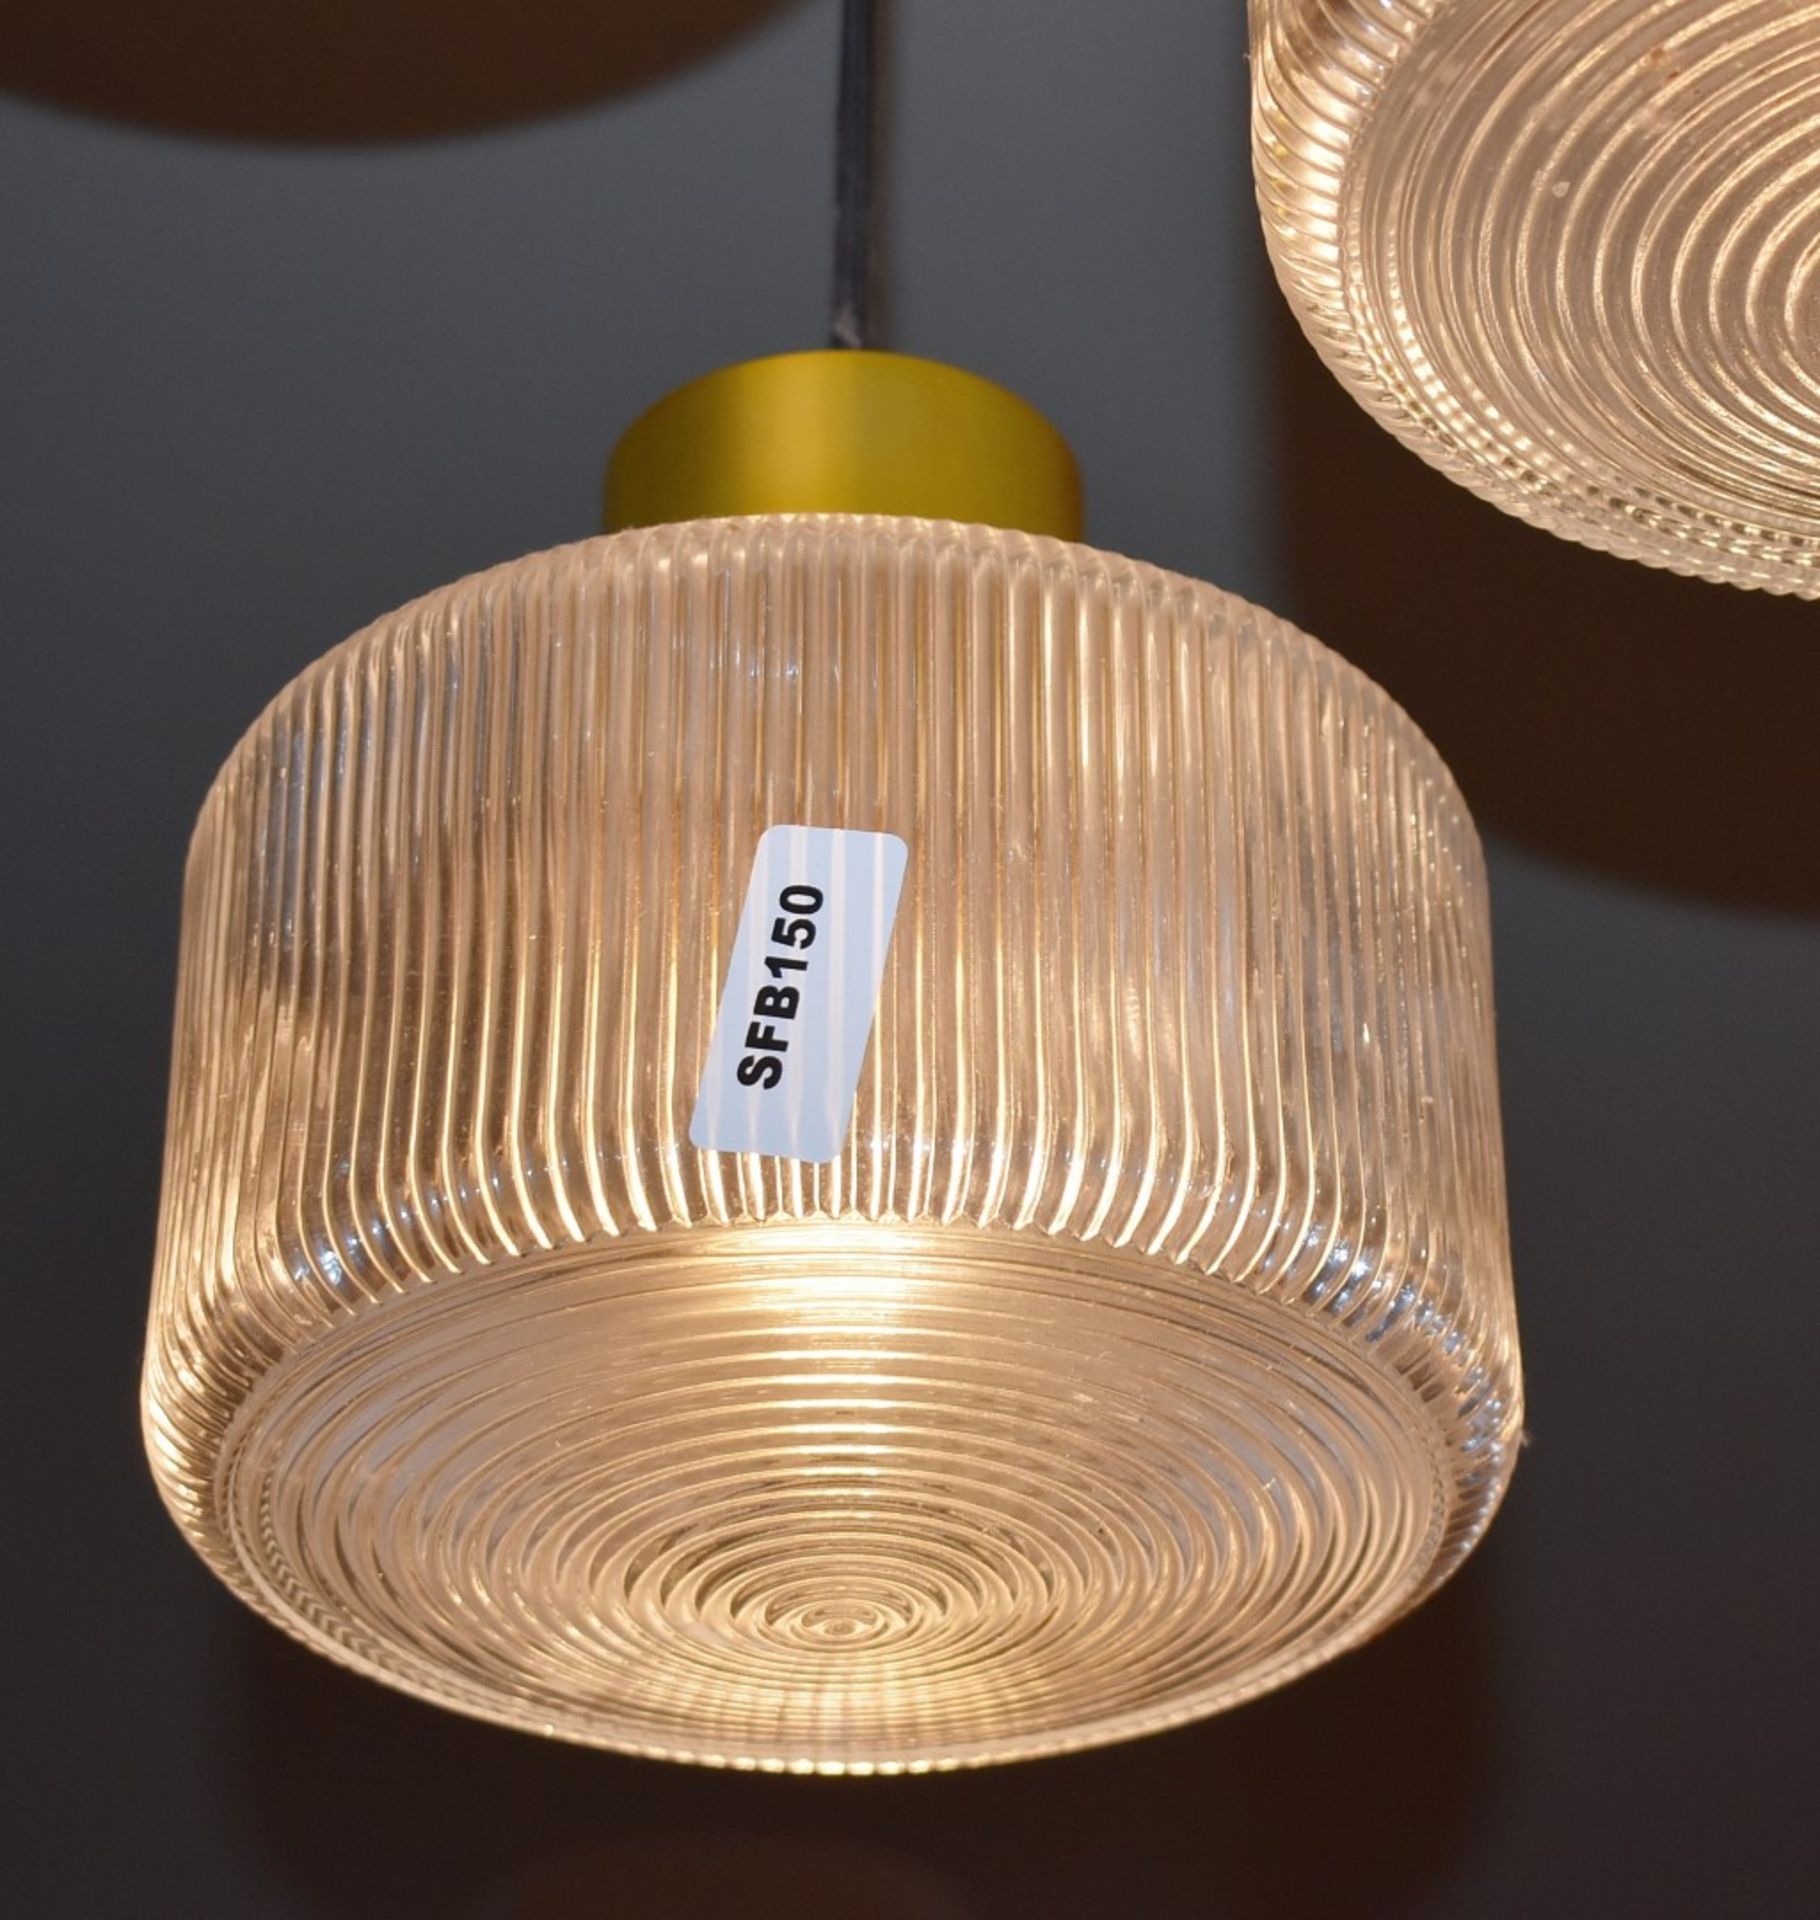 3 x Ceiling Pendant Light Fitting In Bronze With Glass Shades - Dimensions: ⌀18 x H23cm - Image 3 of 3